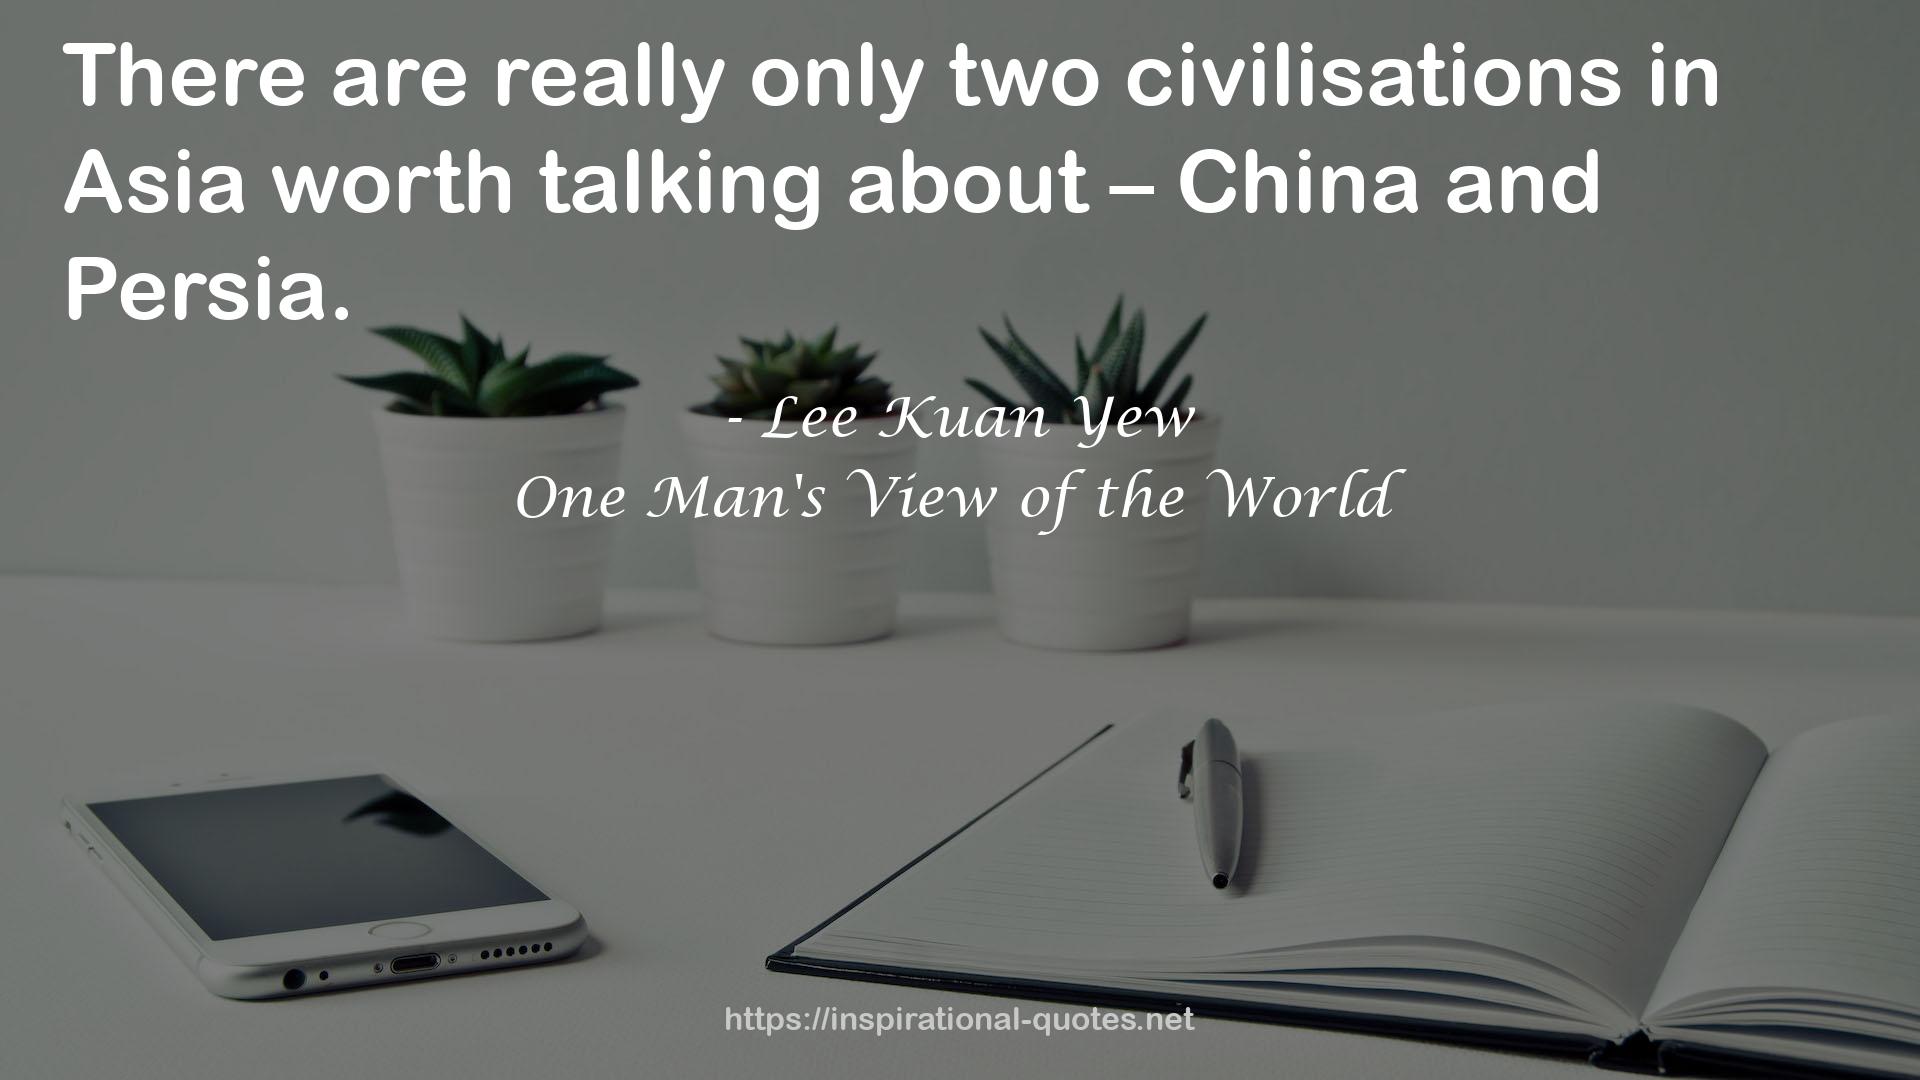 One Man's View of the World QUOTES